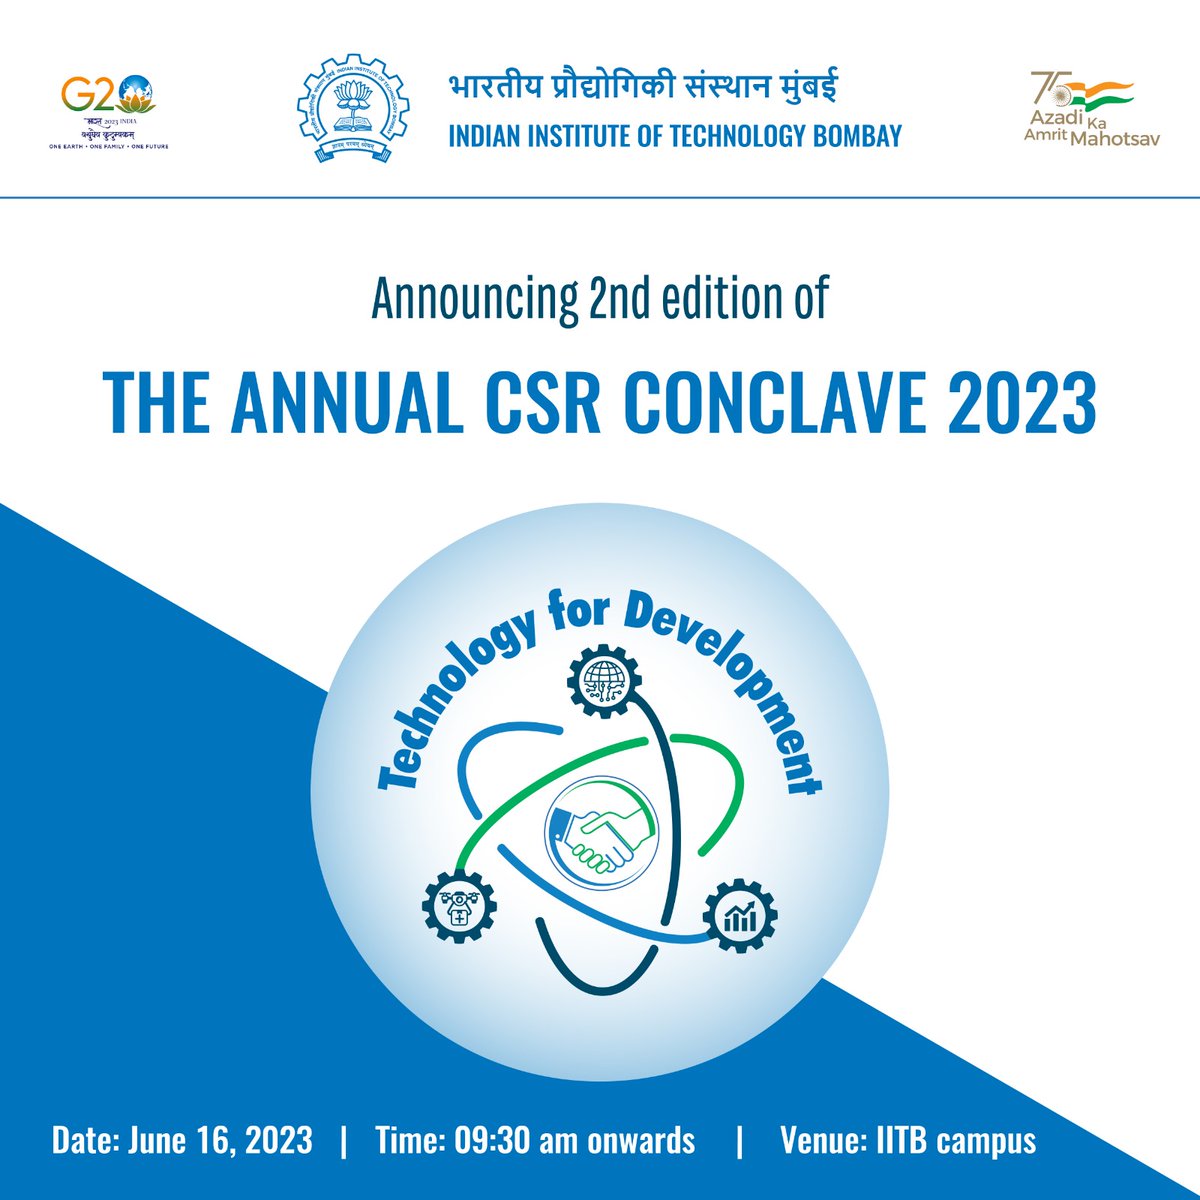 Announcing 2nd edition of #IITBAnnualCSRConclave2023!

Theme: Technology for Development

Thought-provoking panel discussions, a Tech Showcase & more!

More here: rb.gy/gad46

Enroll here: rb.gy/qfvsh

#corporatesocialresponsibility #corporategiving